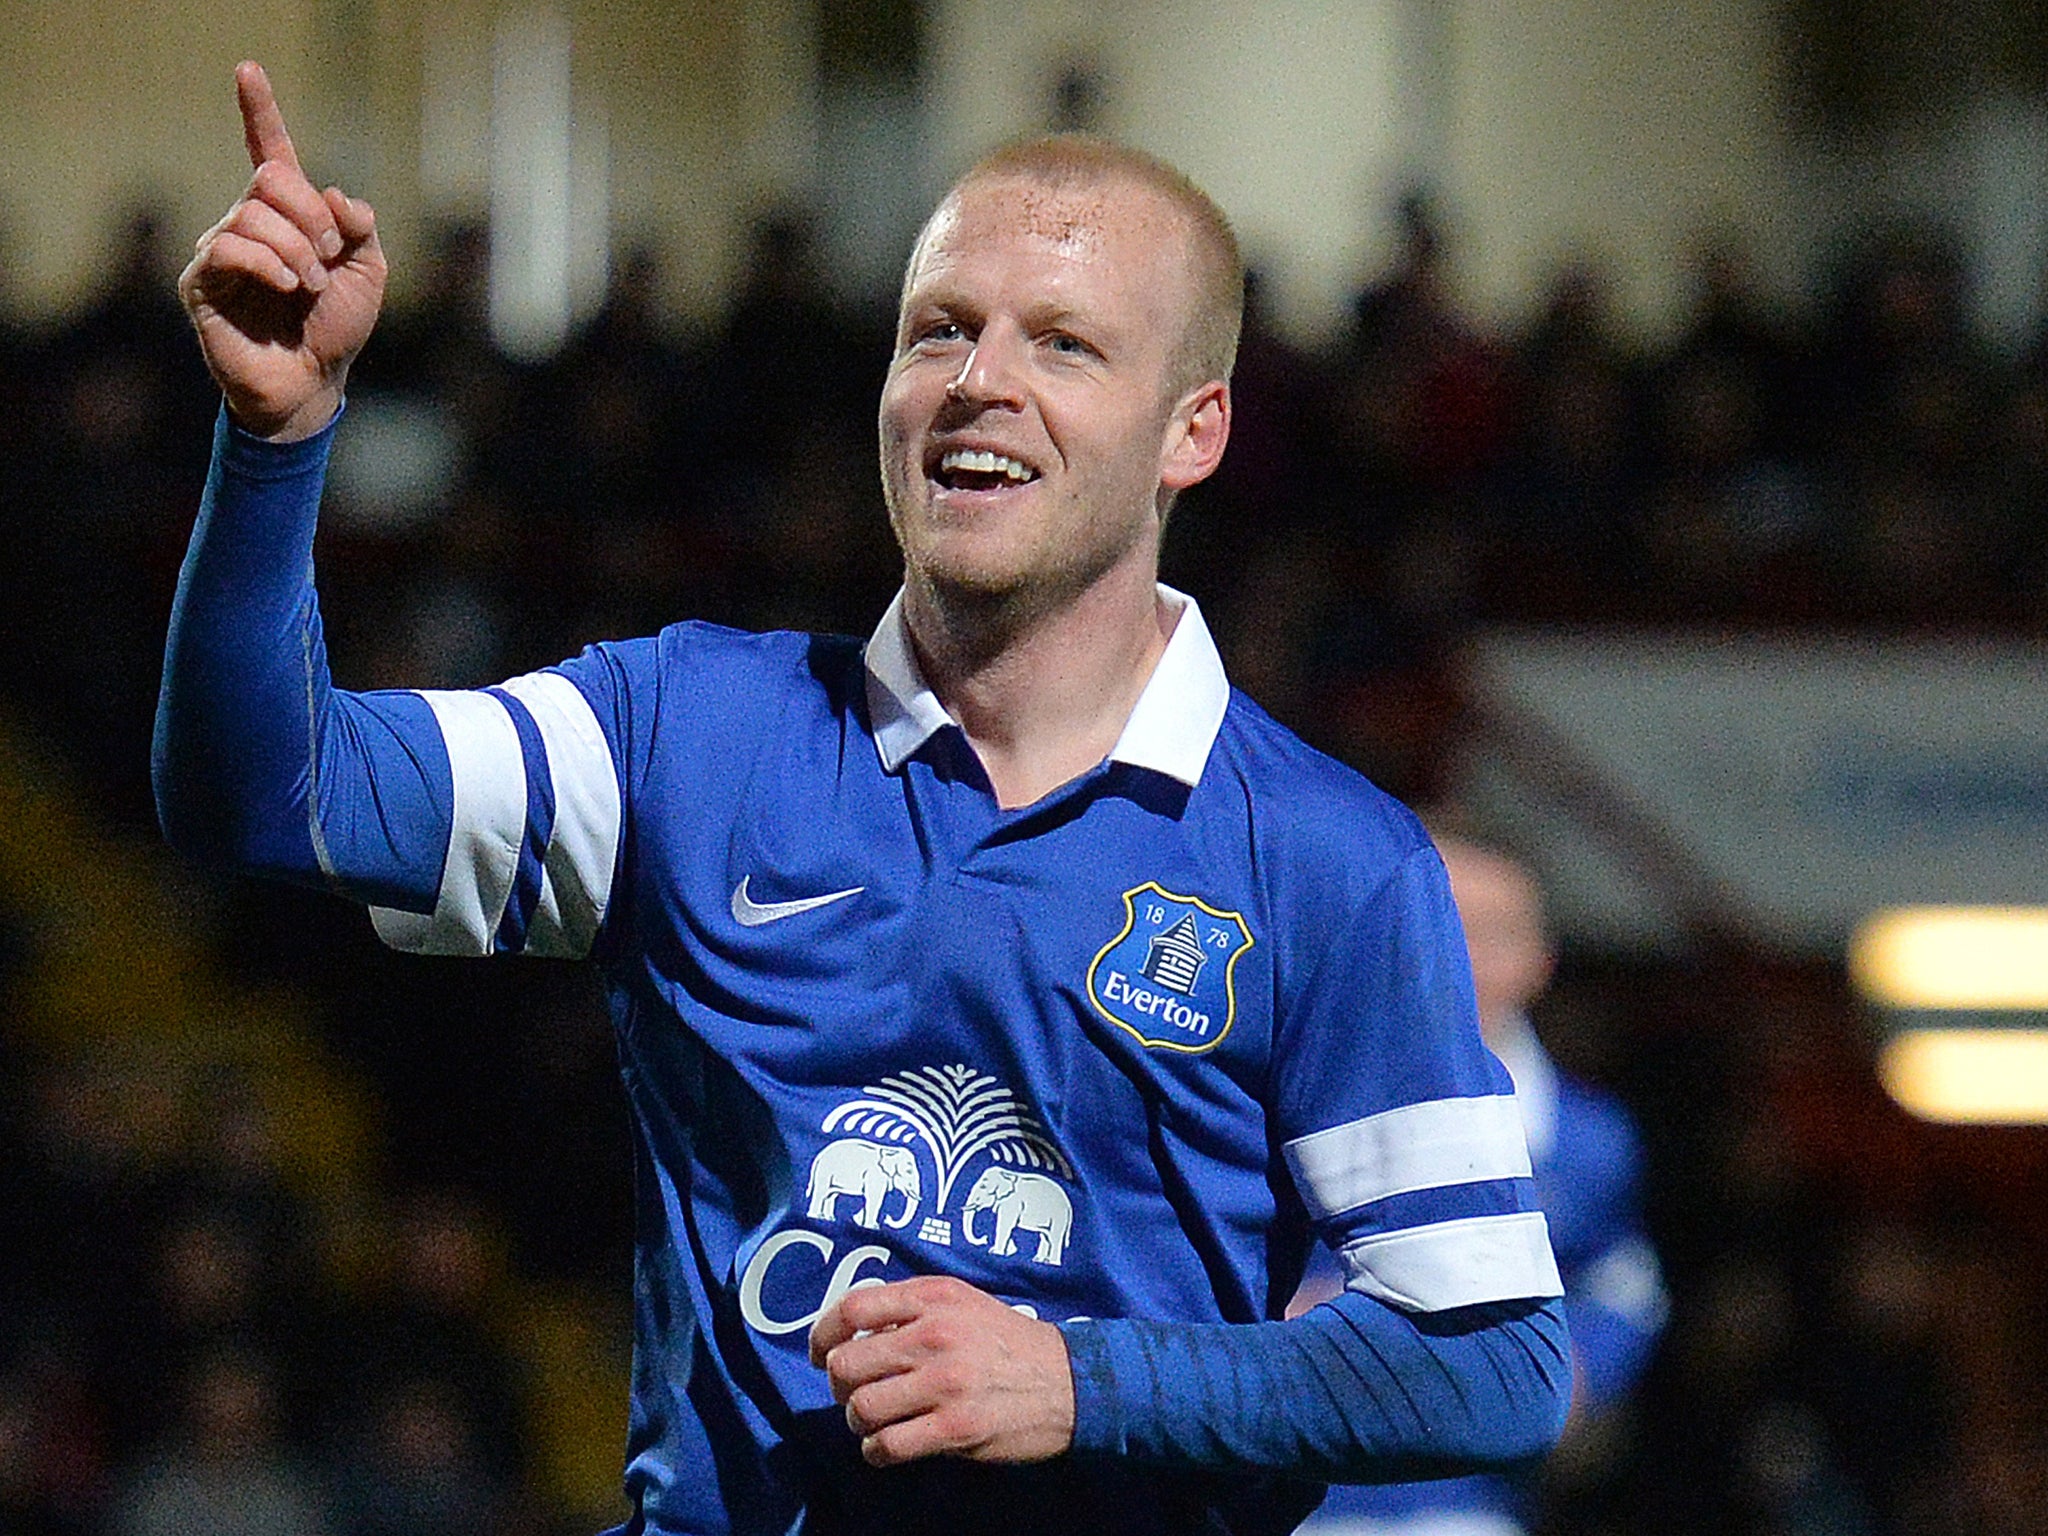 Steven Naismith celebrates after scoring for Everton during the 4-0 FA Cup victory over Stevenage